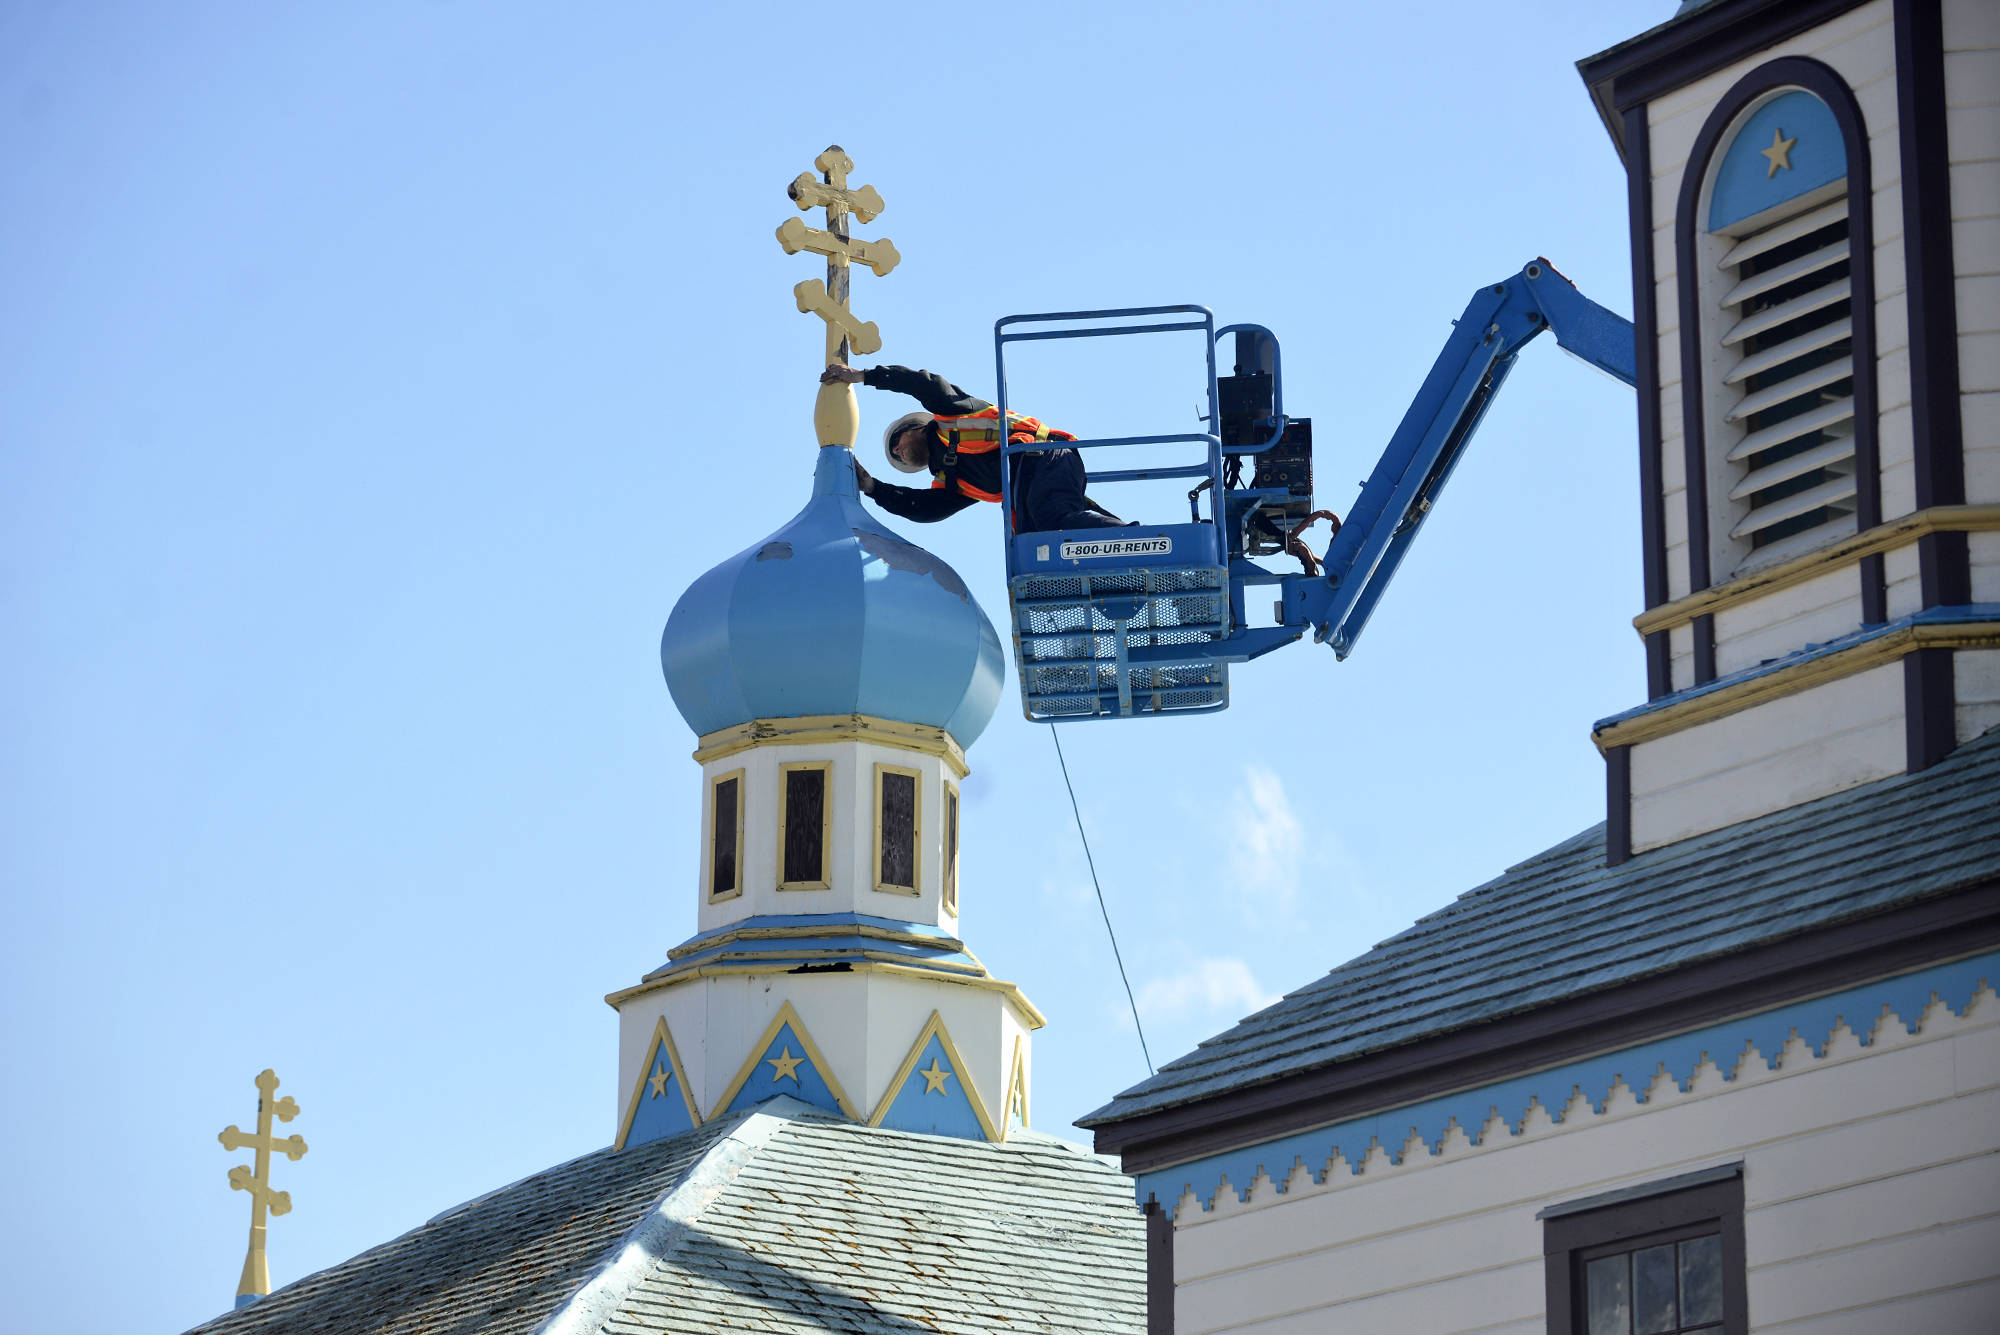 Glenn Beckmann of Rainproof Roofing inspects a weathered and tilting cross atop Kenai’sHoly Assumption of the Virgin Mary Russian Orthodox Church before removing it on Friday, May 4, 2018. Dorothy Gray , a Holy Assumption member and treasurer of the preservation nonprofit Russian Orthodox Sacred Sites in Alaska, said the church is now looking for local craftspeople interested in making replacements for the three old crosses. (Ben Boettger/Peninsula Clarion)